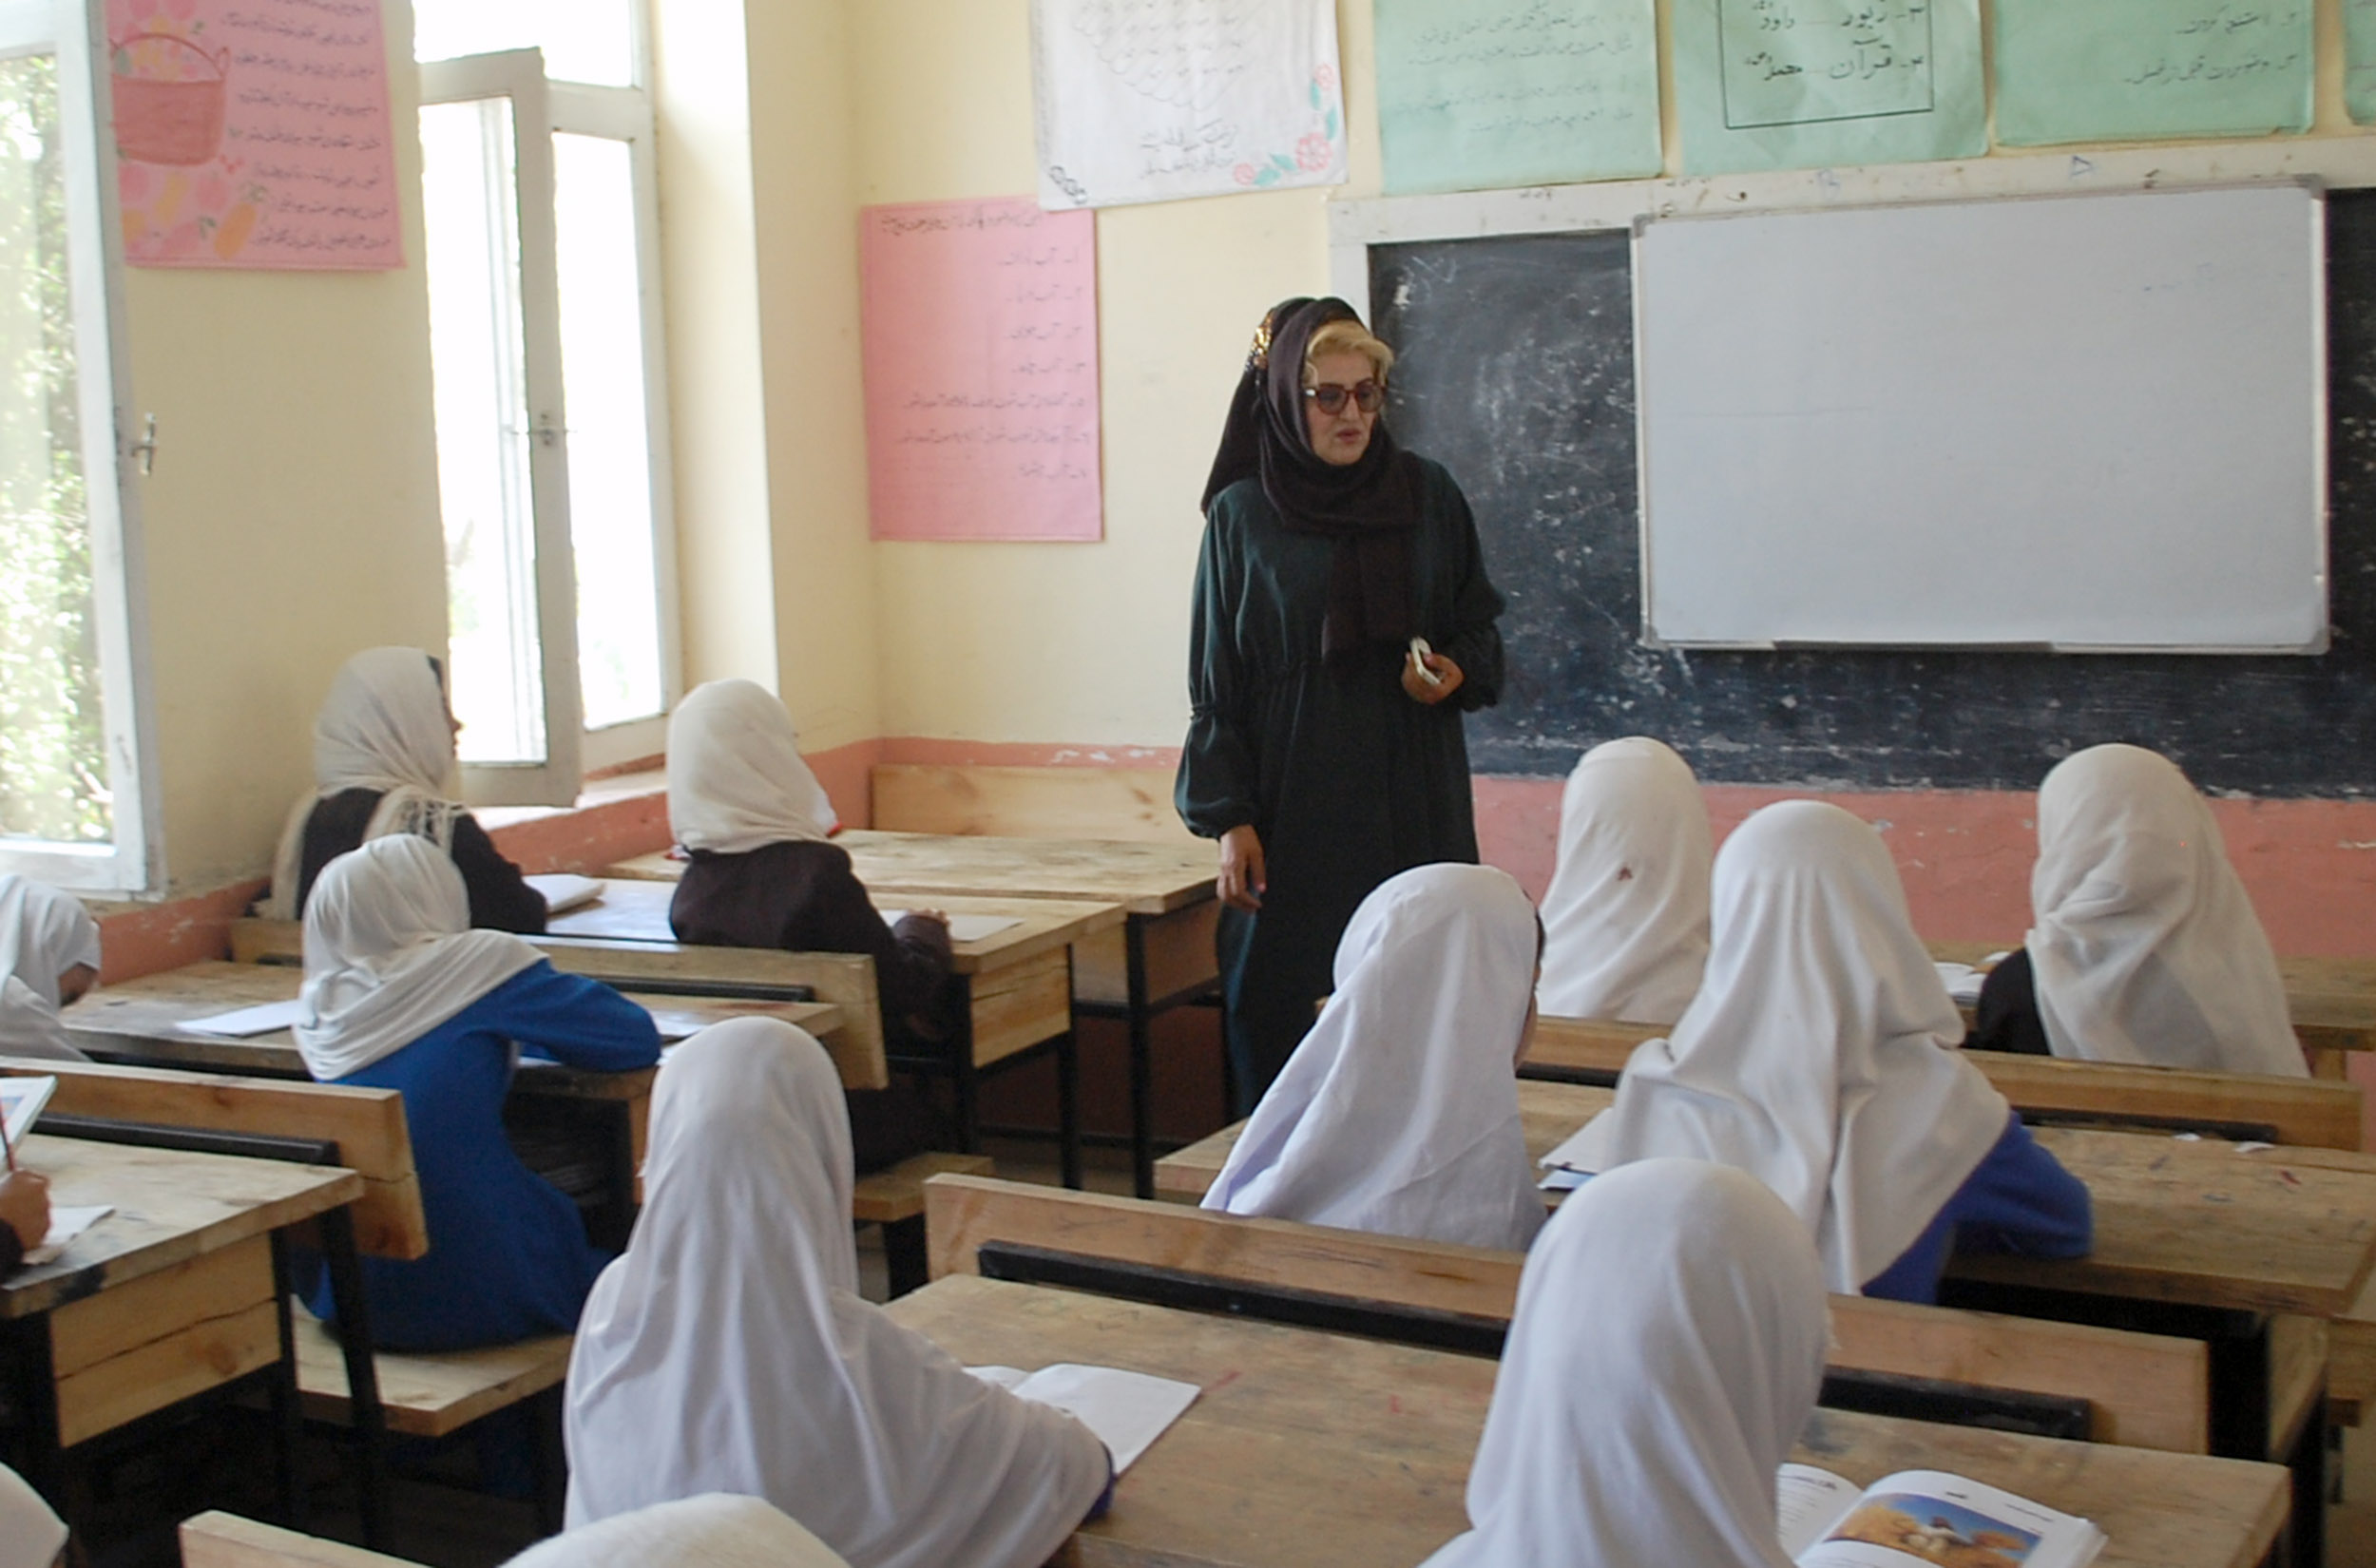 Girls excluded as Afghan secondary schools reopen